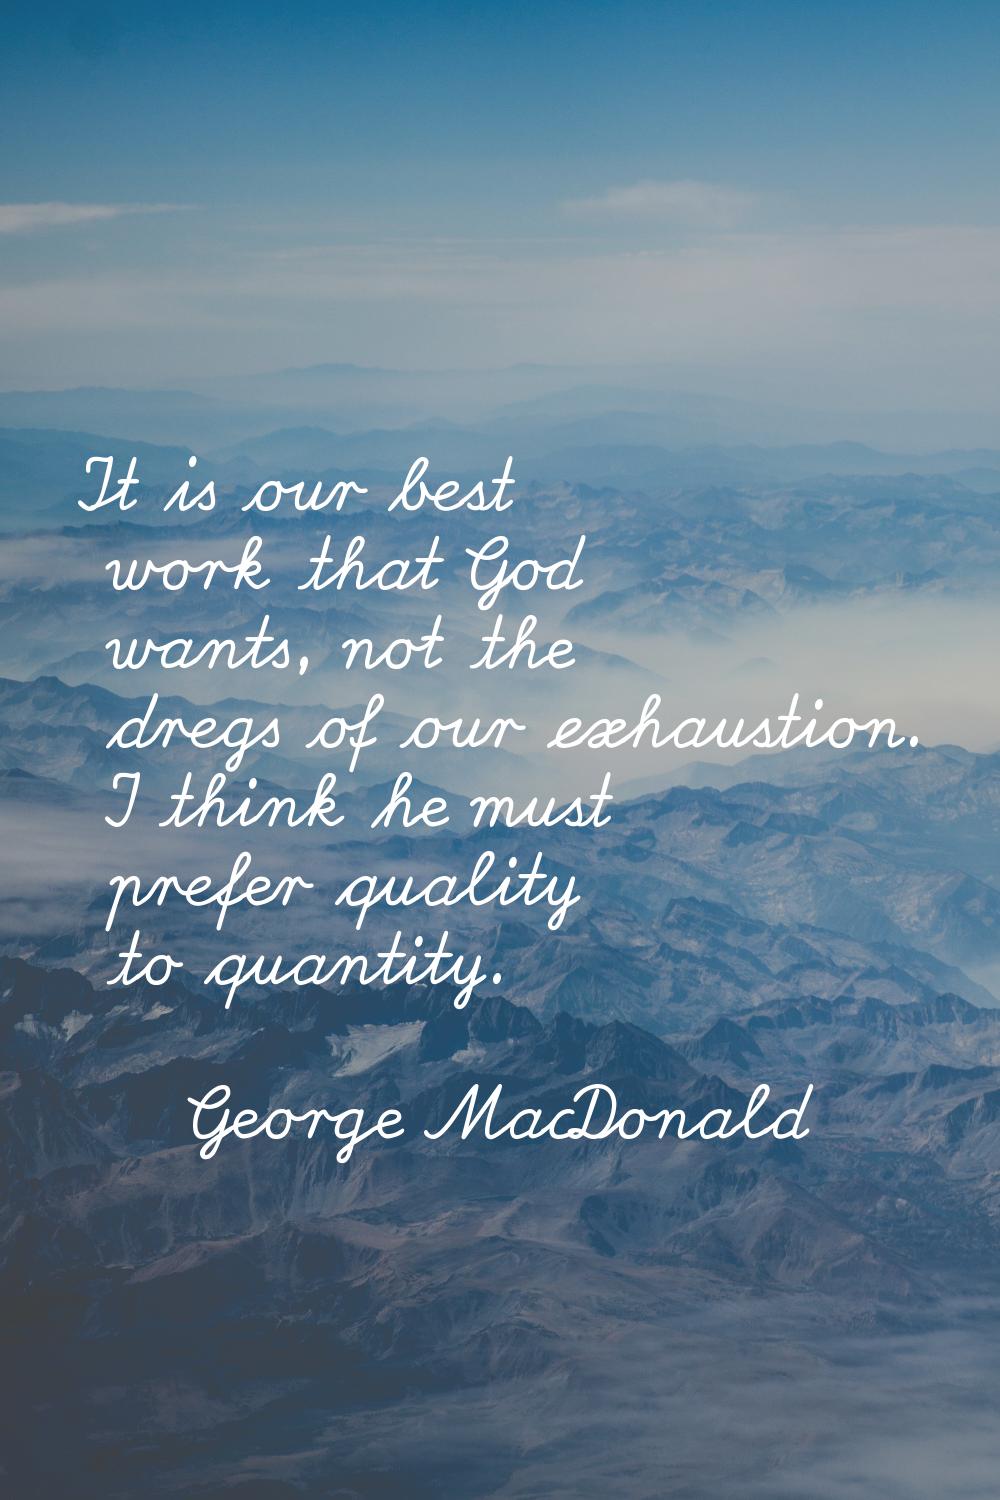 It is our best work that God wants, not the dregs of our exhaustion. I think he must prefer quality